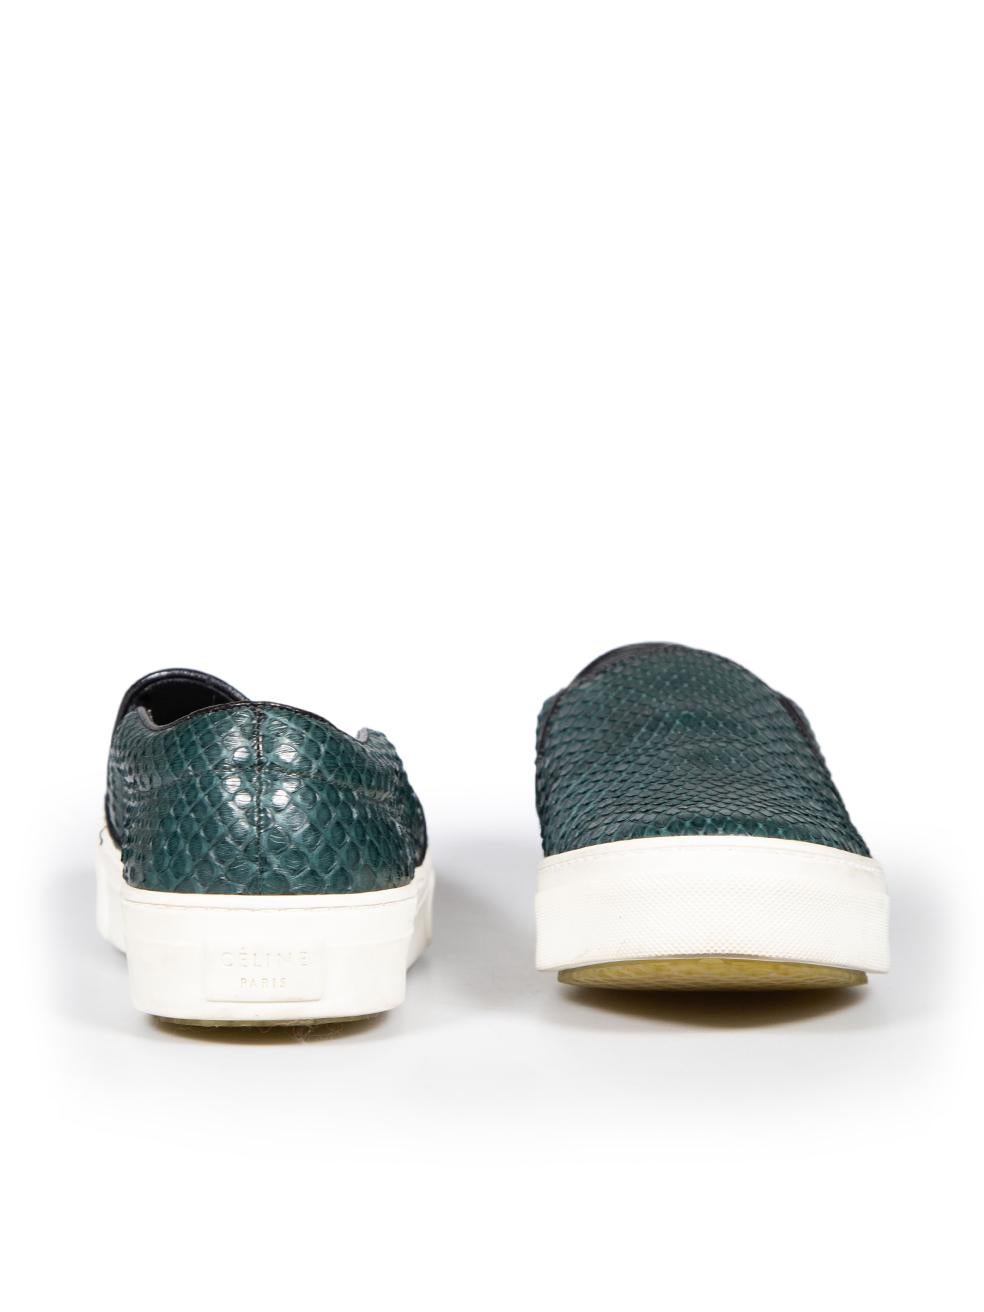 Céline Green Python Leather Slip-On Trainers Size IT 38.5 In Good Condition For Sale In London, GB